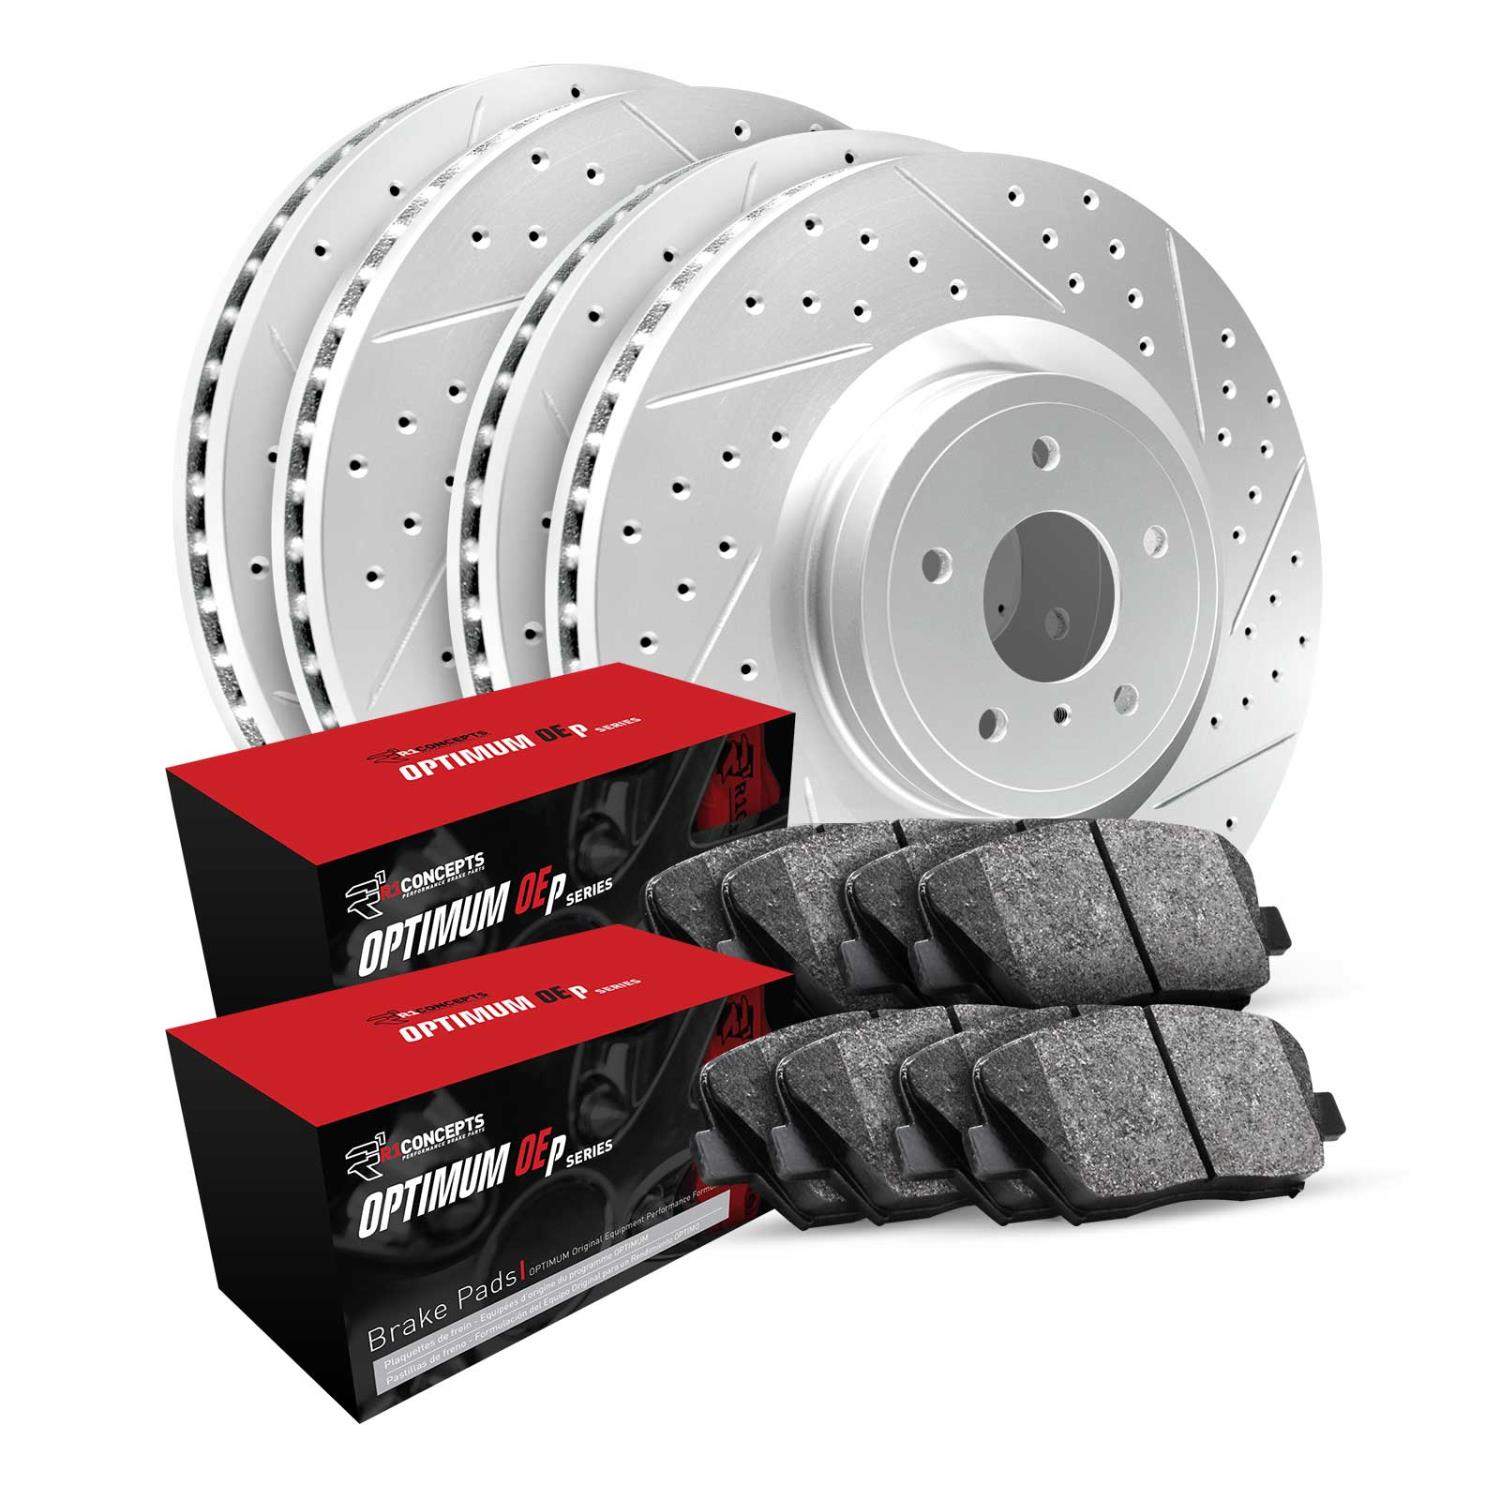 GEO-Carbon Drilled & Slotted Brake Rotor & Drum Set w/Optimum OE Pads & Shoes, 2016-2020 Fits Multiple Makes/Models